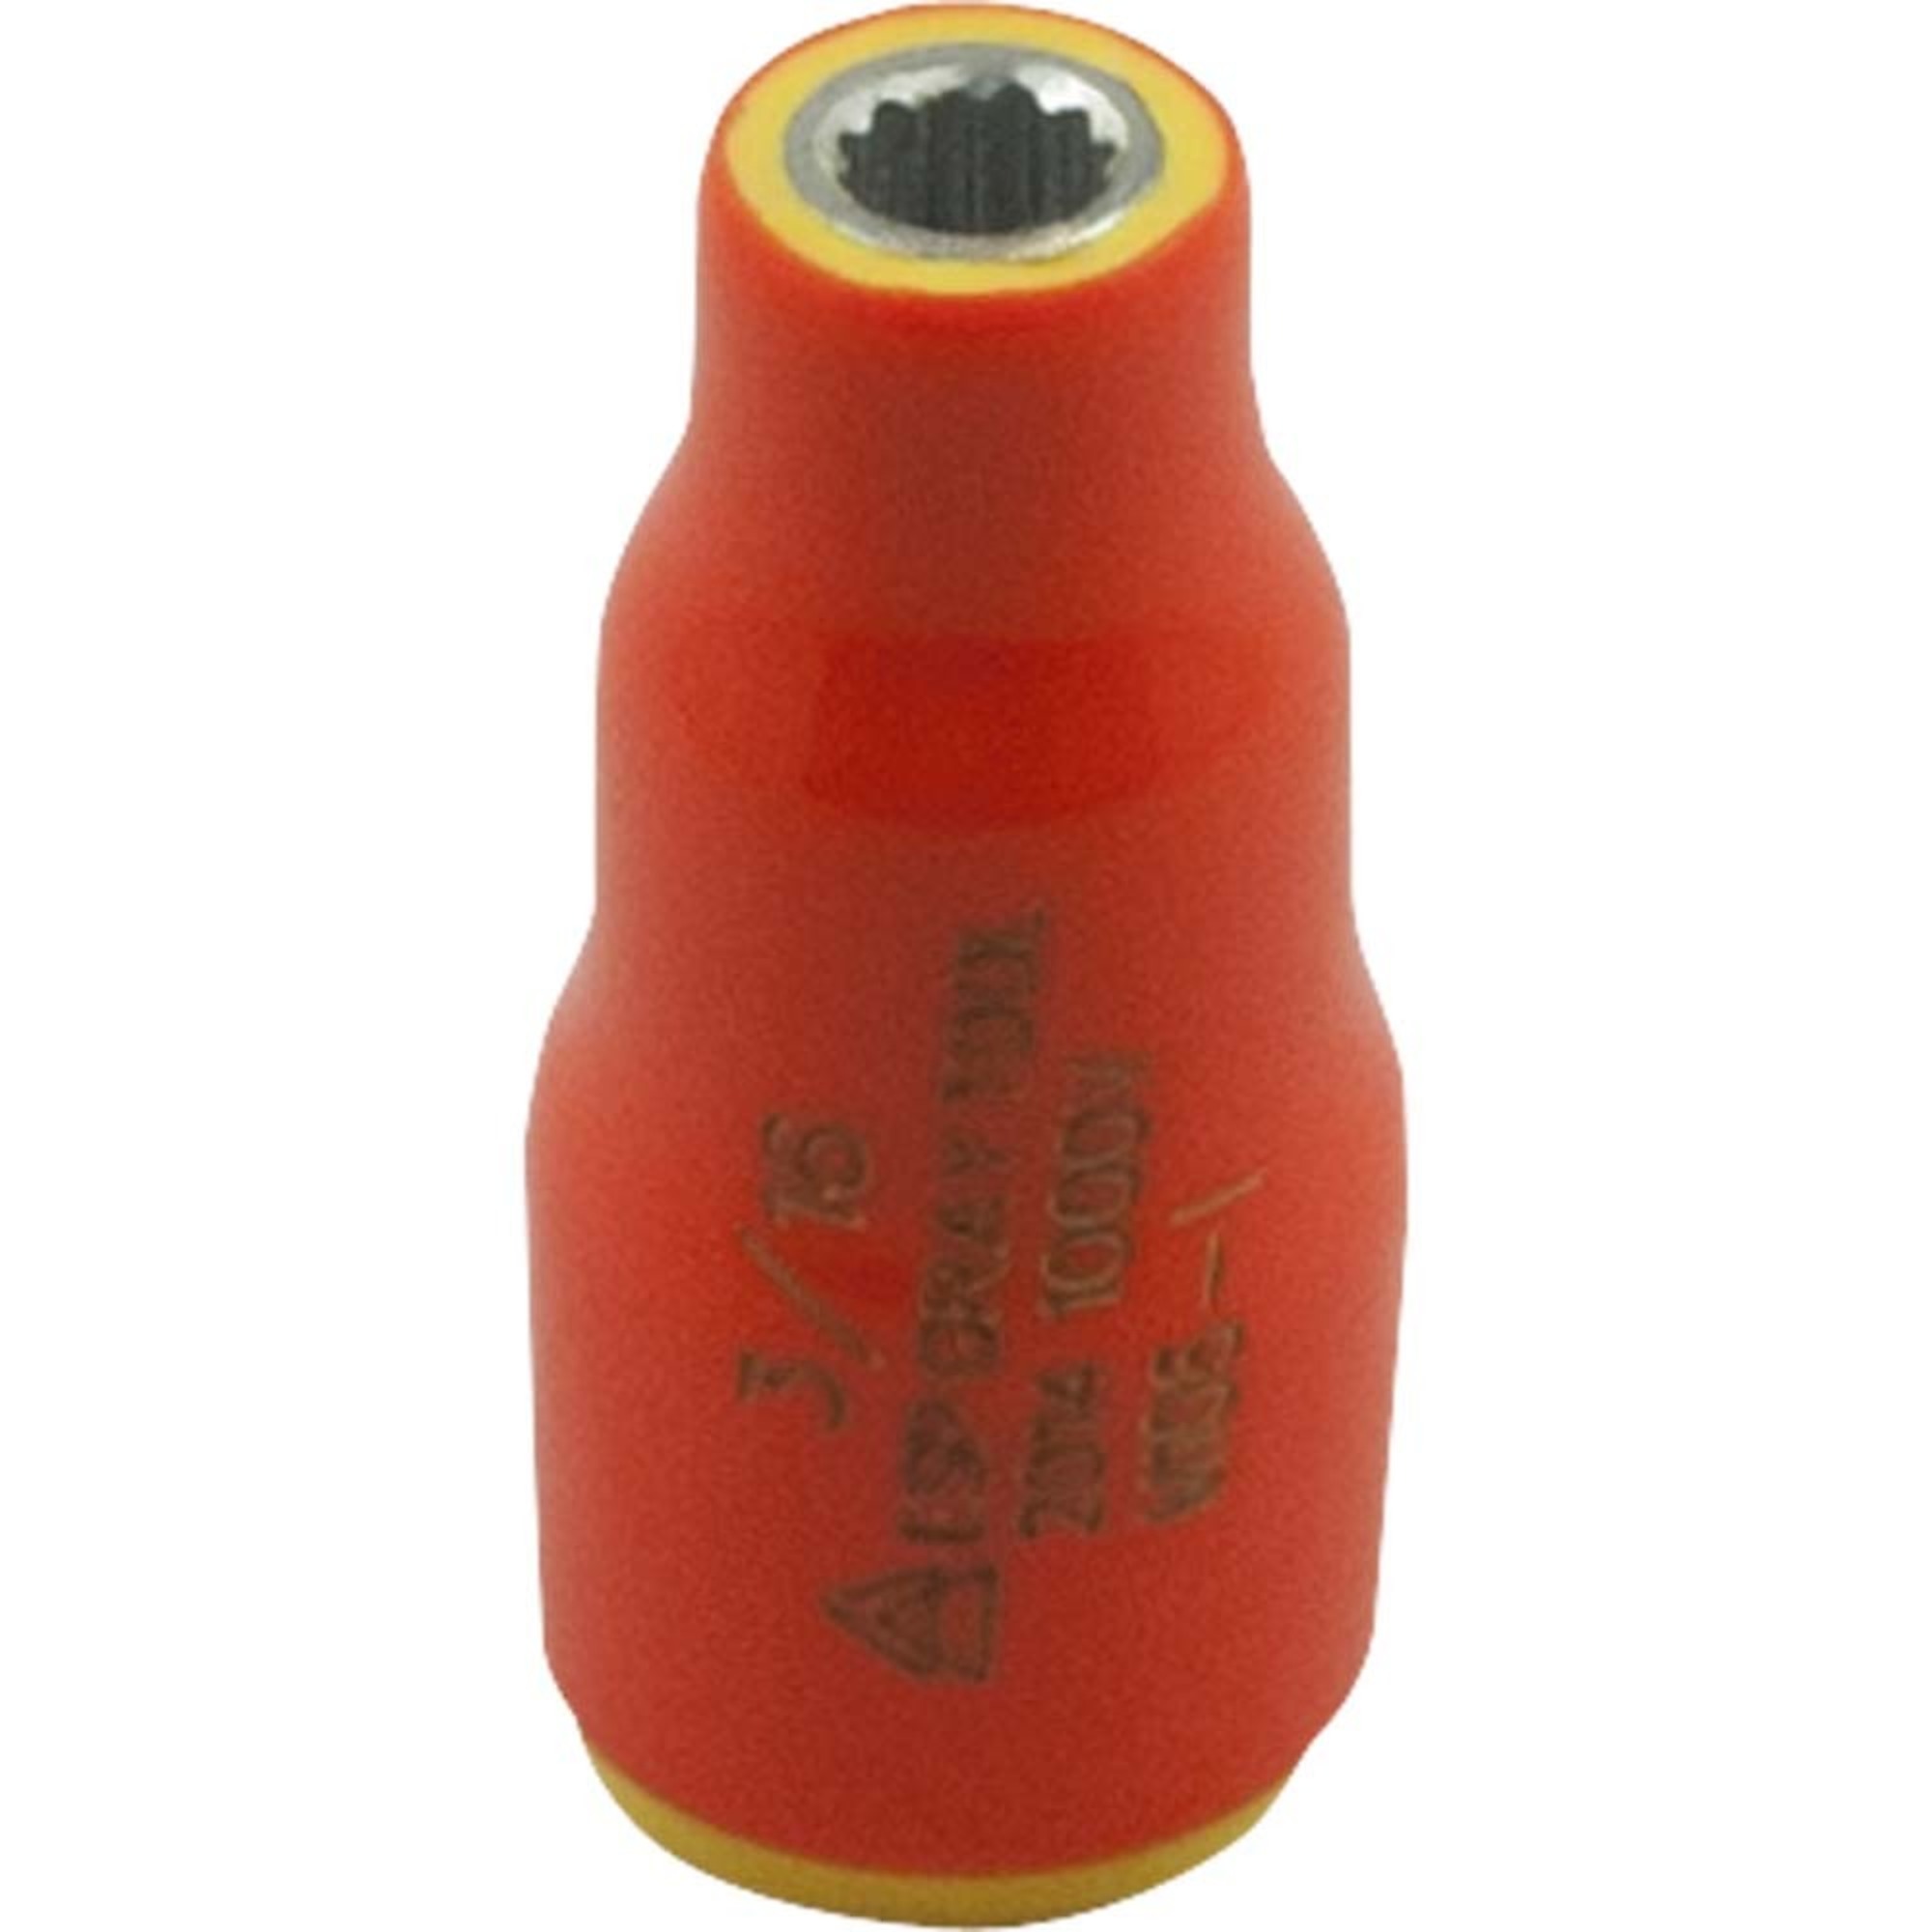 Gray Tools, 3/16Inch X 1/4Inch Drive Socket 1000V Insulated, Socket Size 3/16 in, Drive Size 1/4 in, Model V106-I